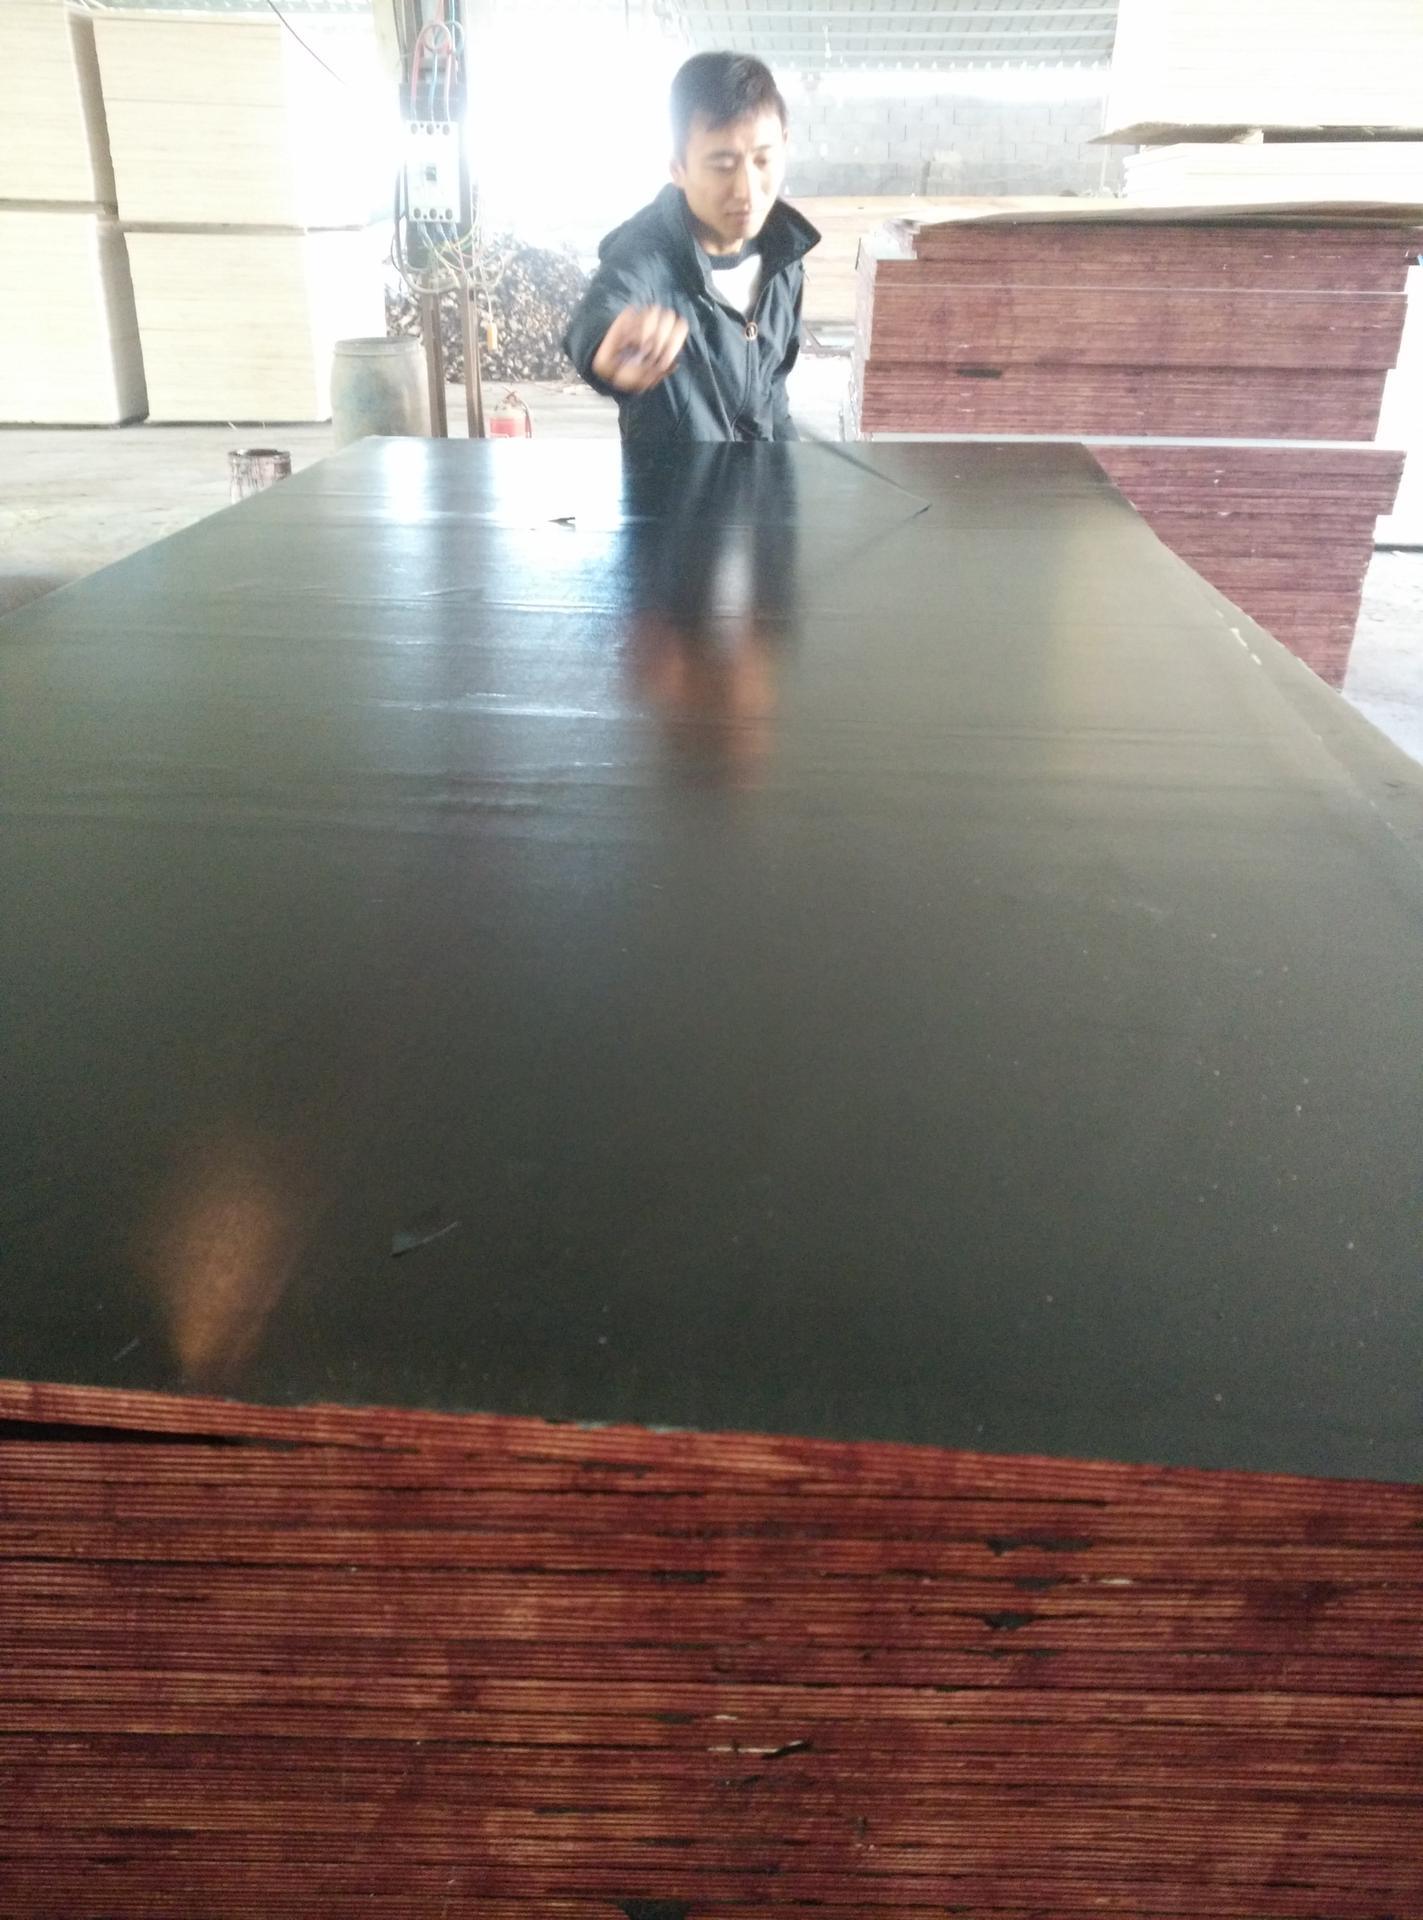 Chinese Film Faced Plywood for Concrete Formwork